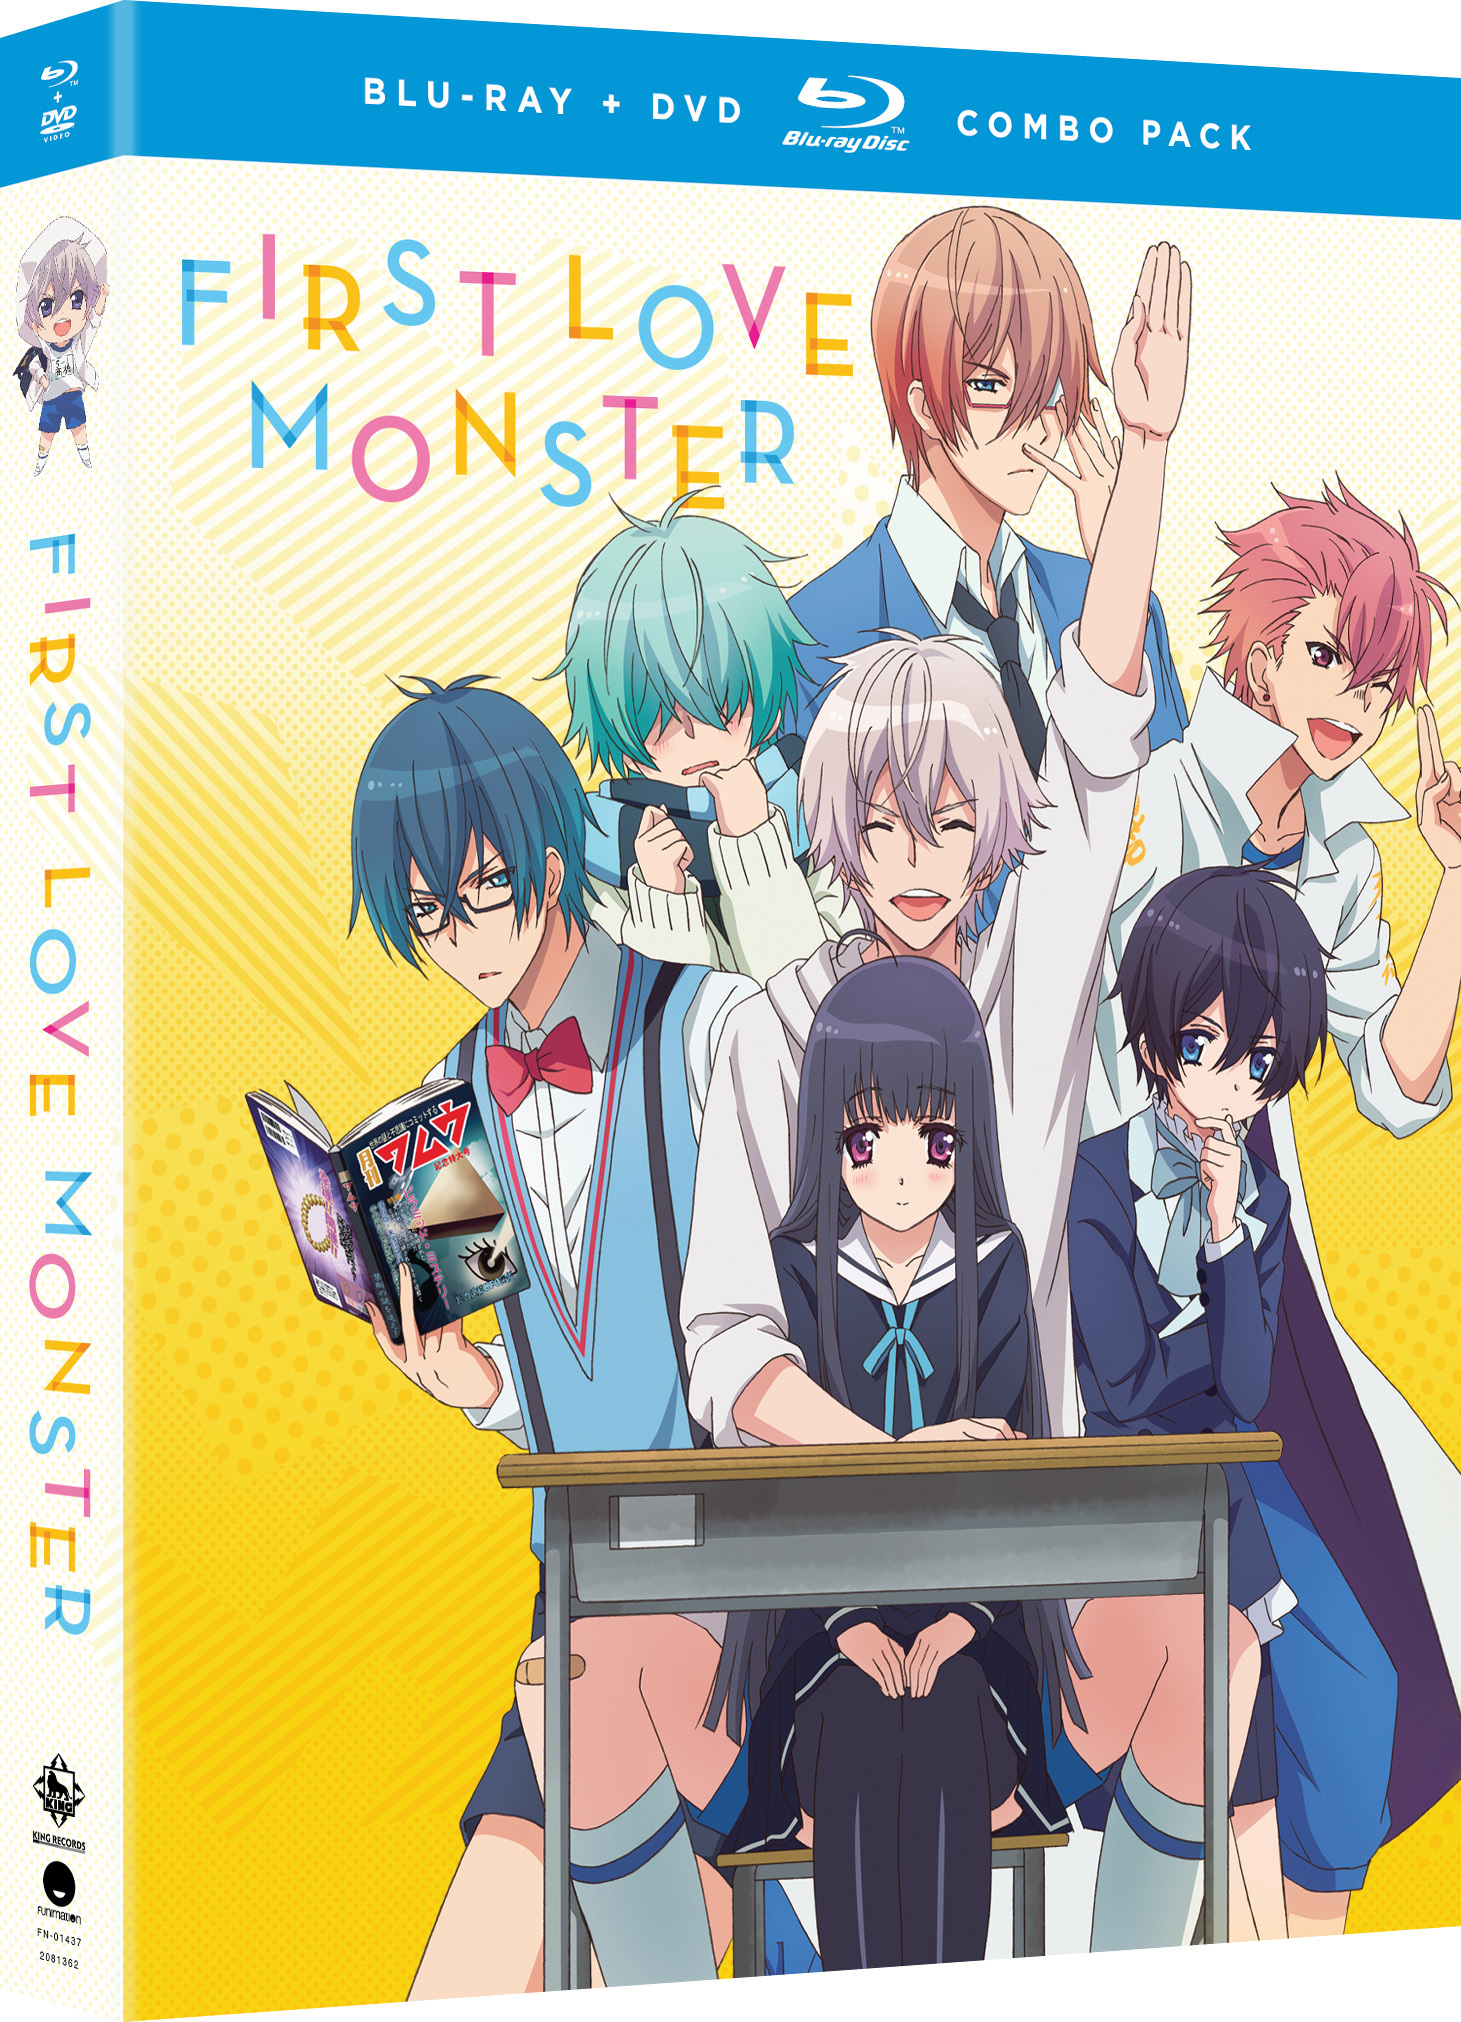 First Love Monster - The Complete Series - Blu-ray + DVD image count 0